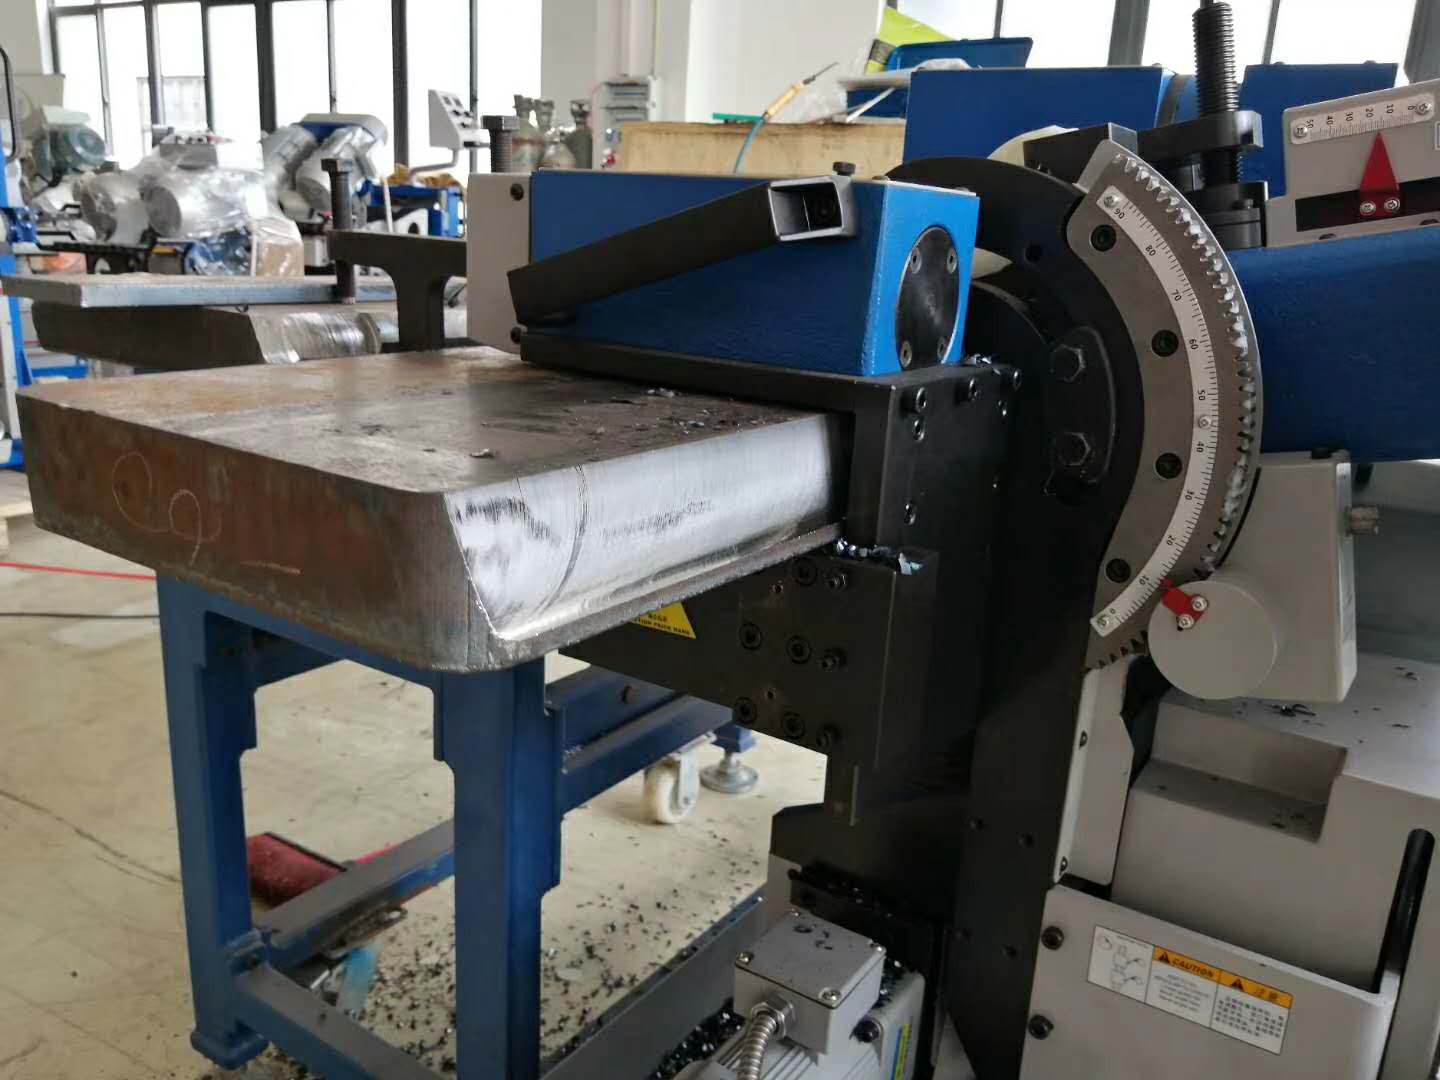 How to make a U/J bevel joint for weld prep by mobile beveling machine?